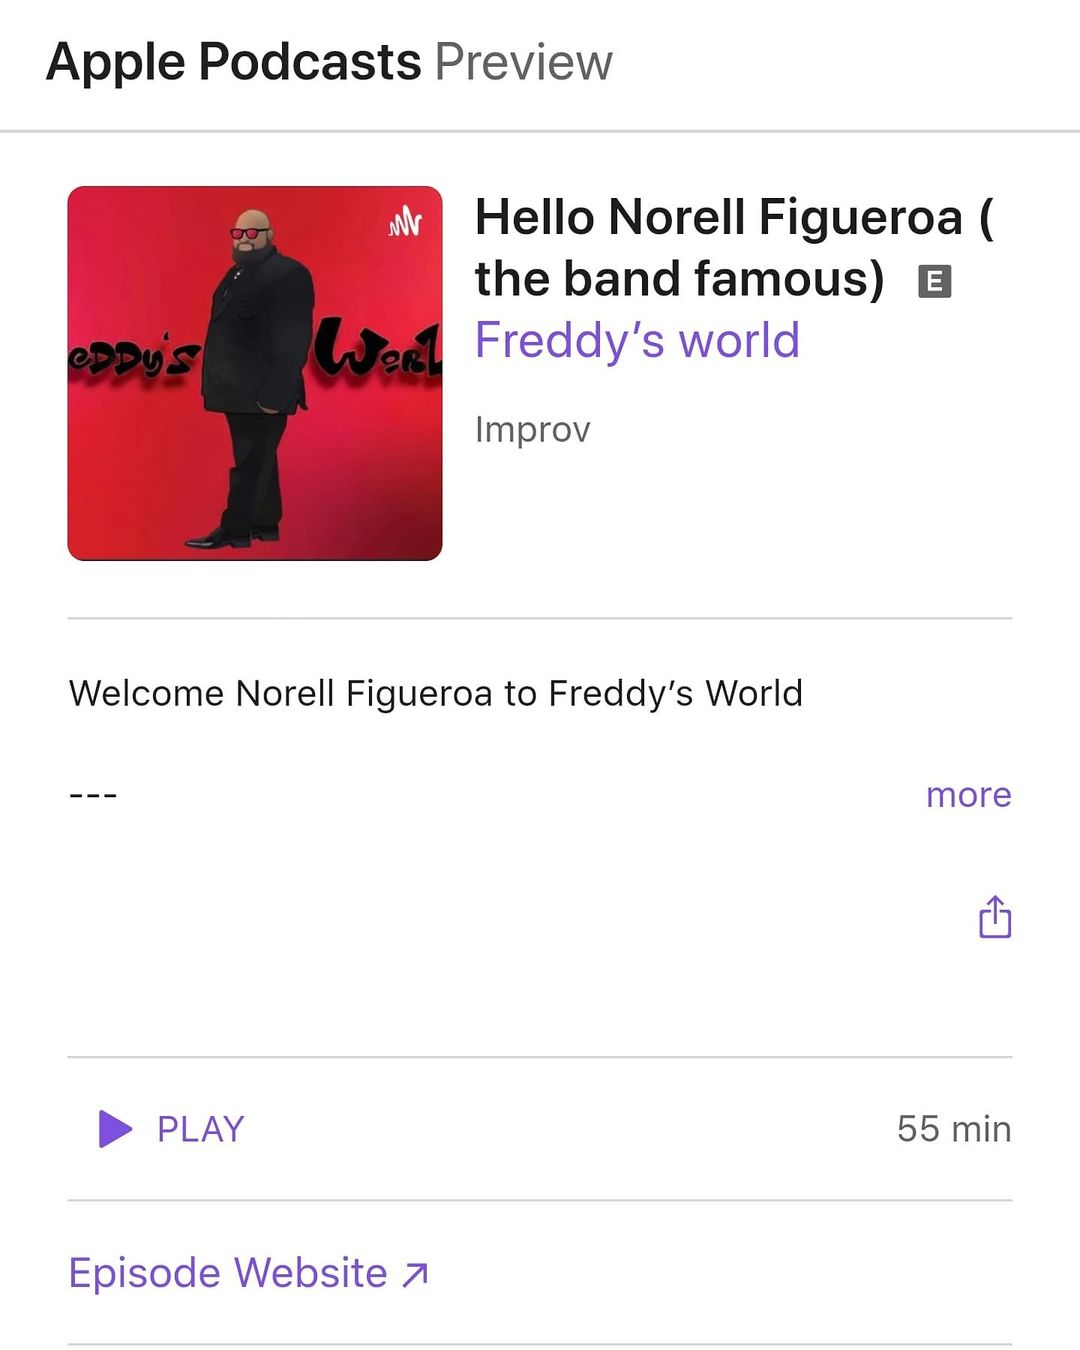 Check out Freddy's World featuring The Band Famous!